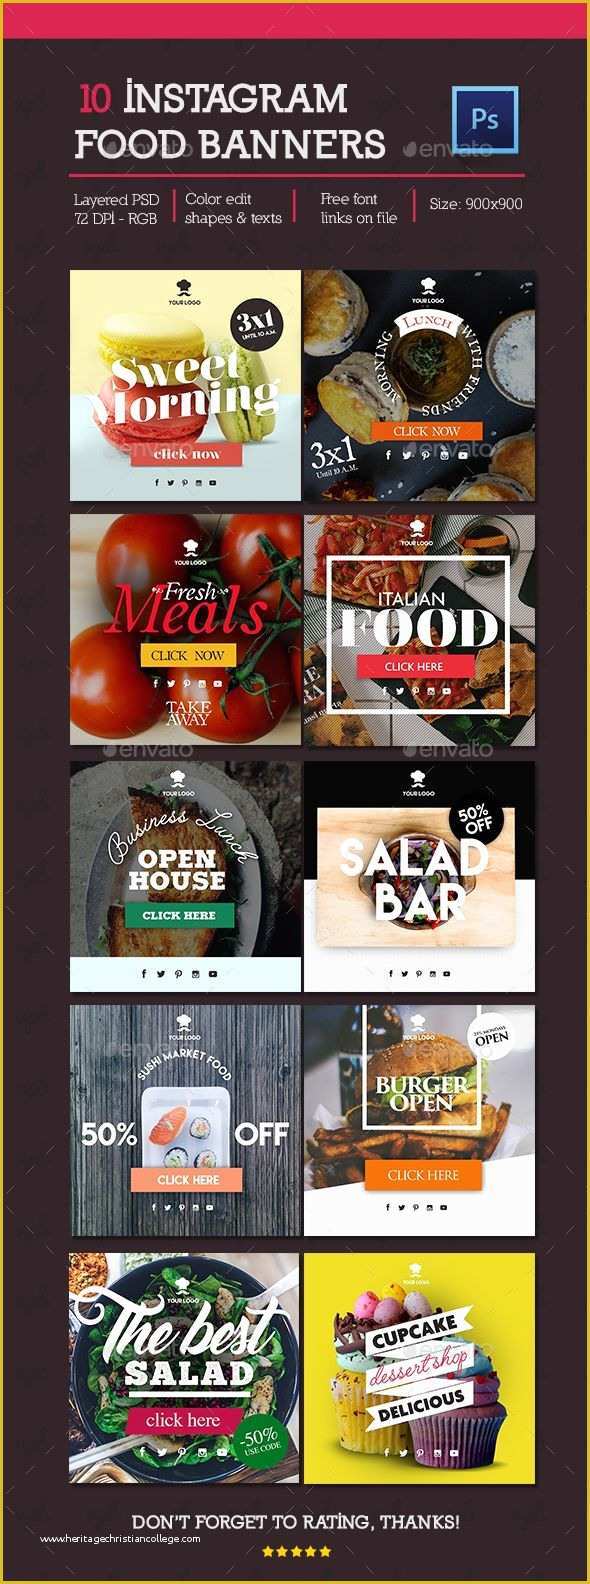 Food Banner Design Template Free Of 91 Best Instagram Banners Images On Pinterest